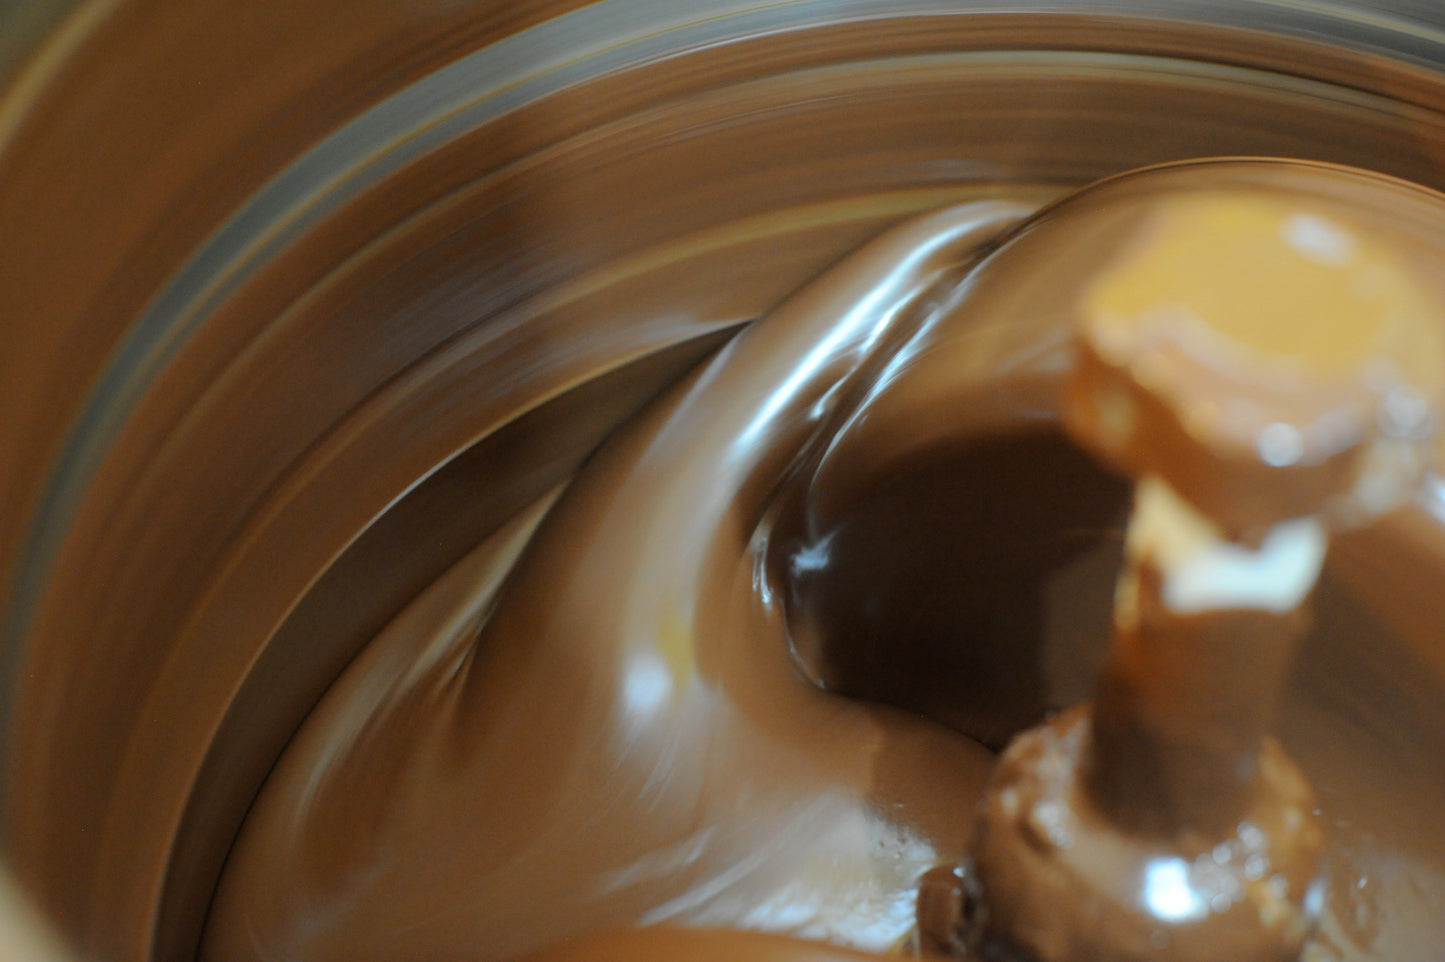 Grinding, refining and conching in the chocolate making process